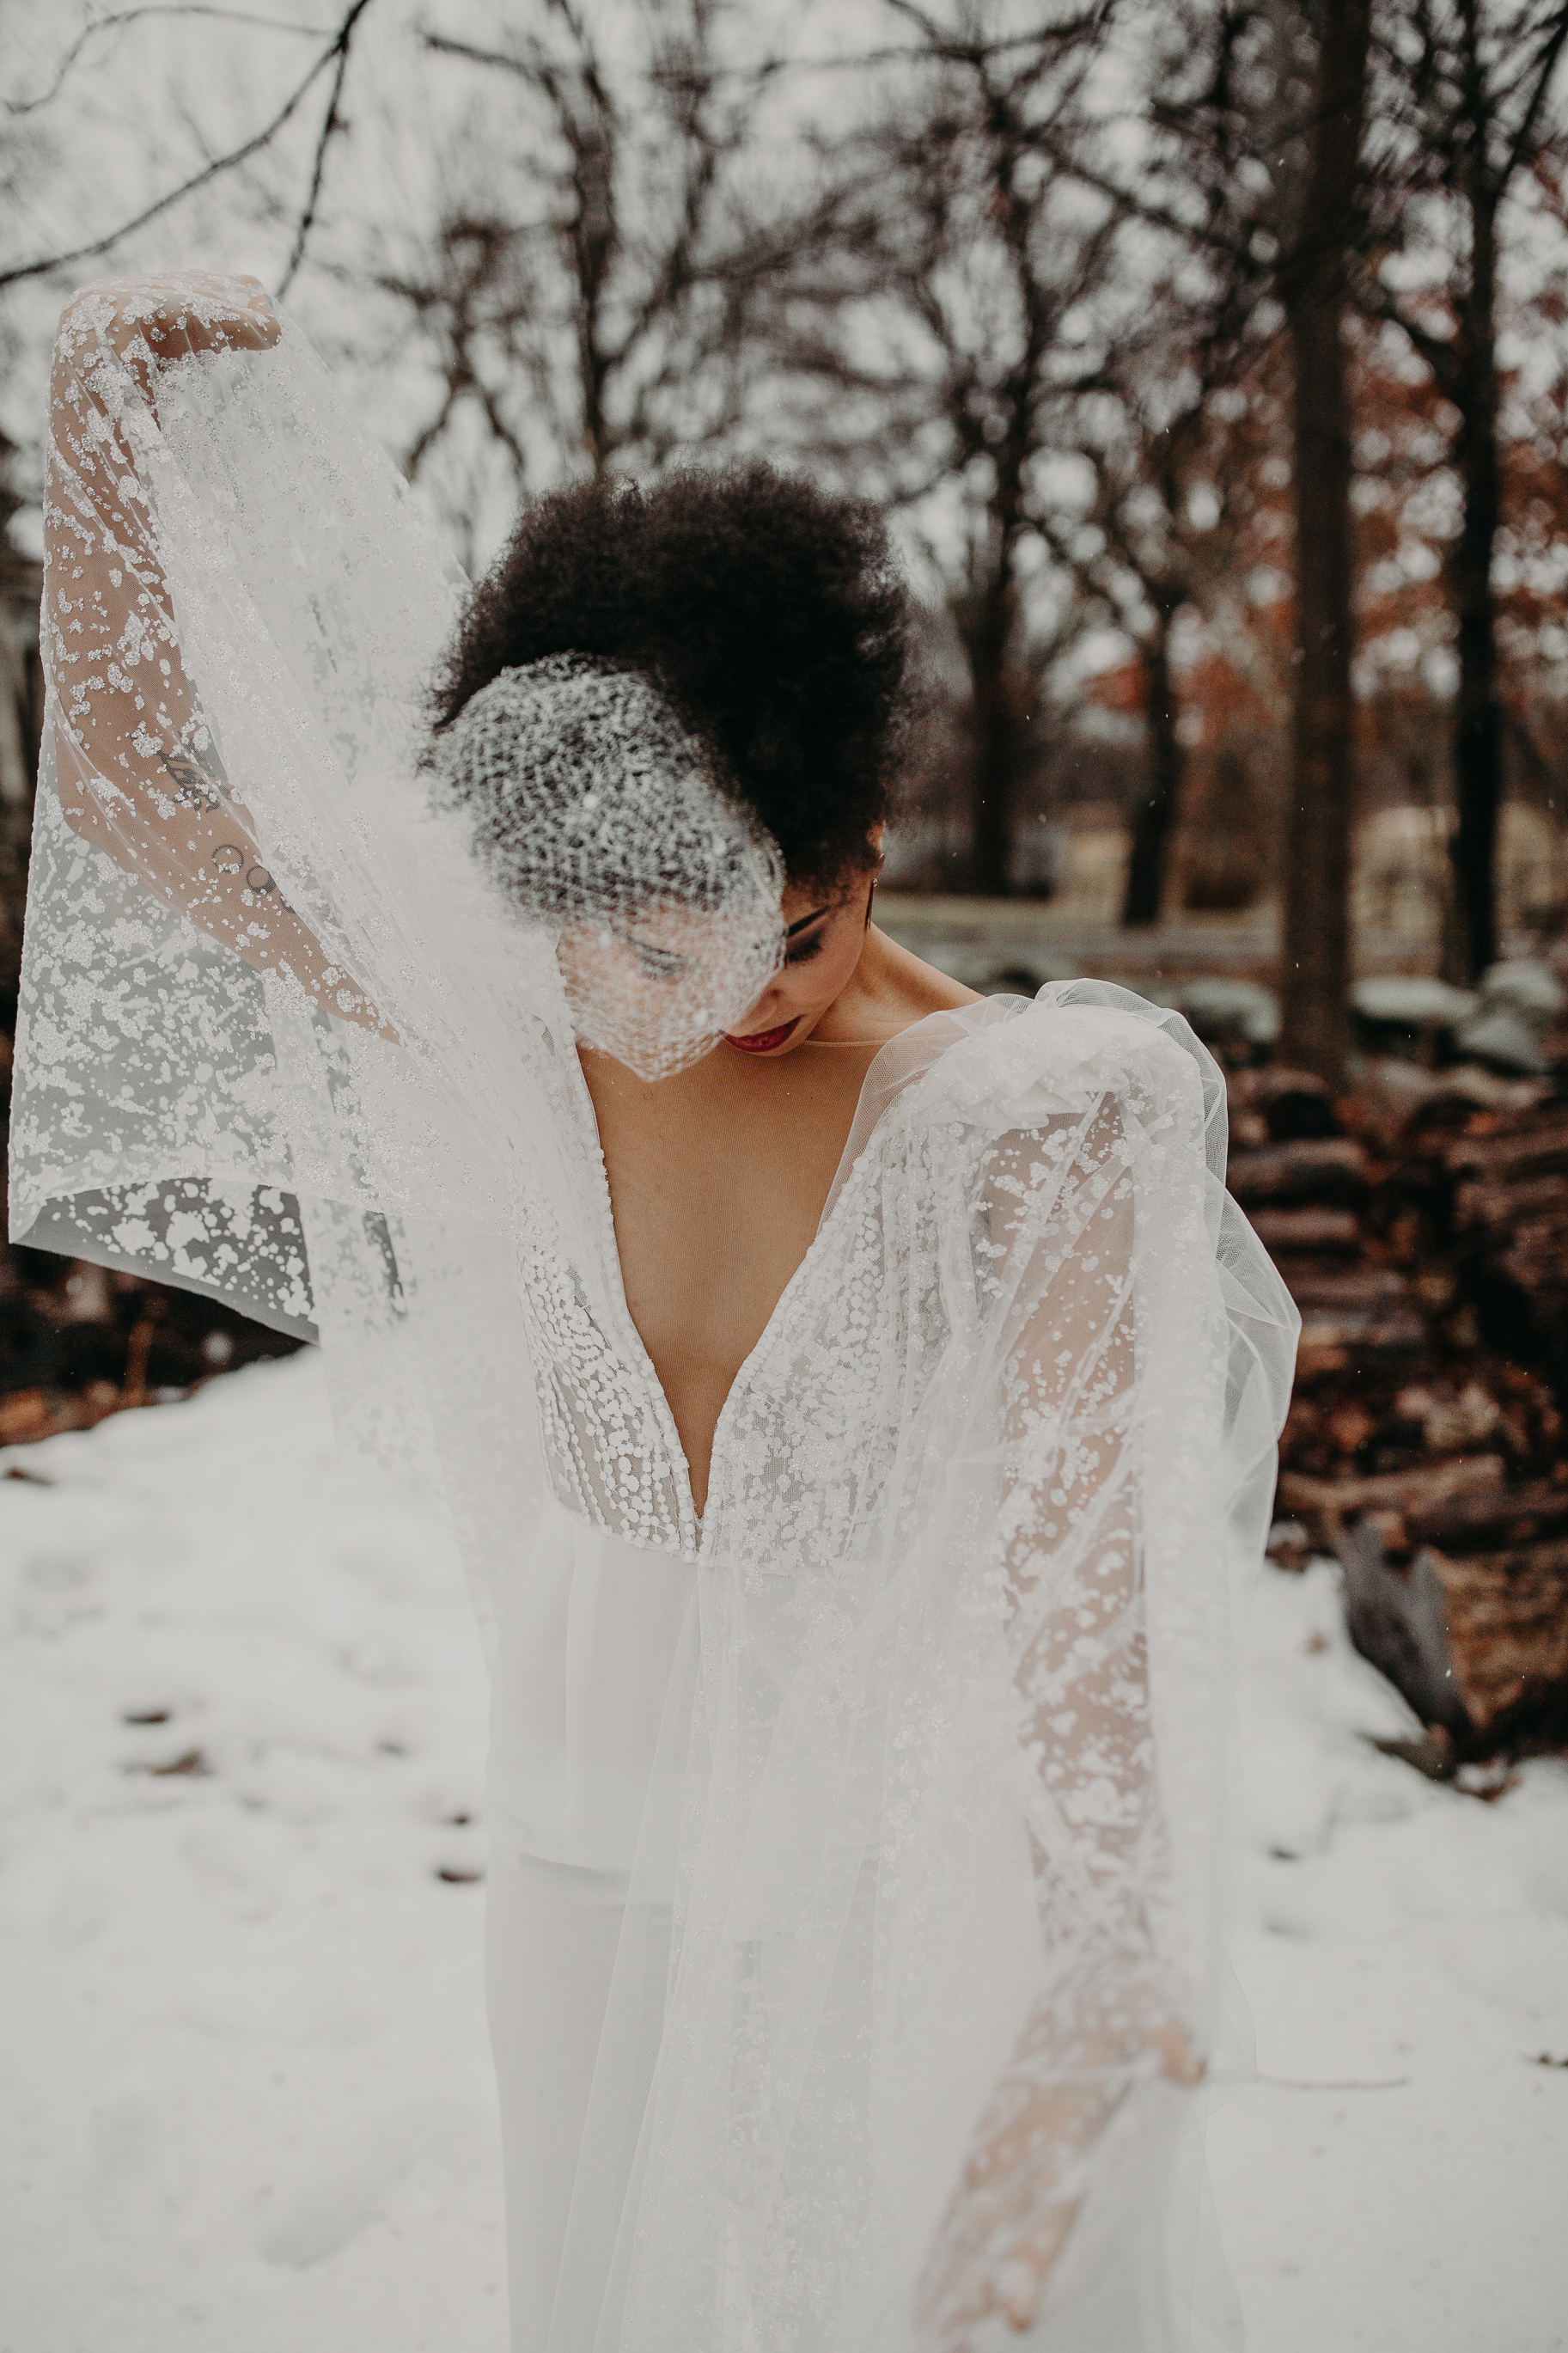 Dancing at her B&B winter fashionable elopement in Hudson, New York - Pearl Weddings & Events